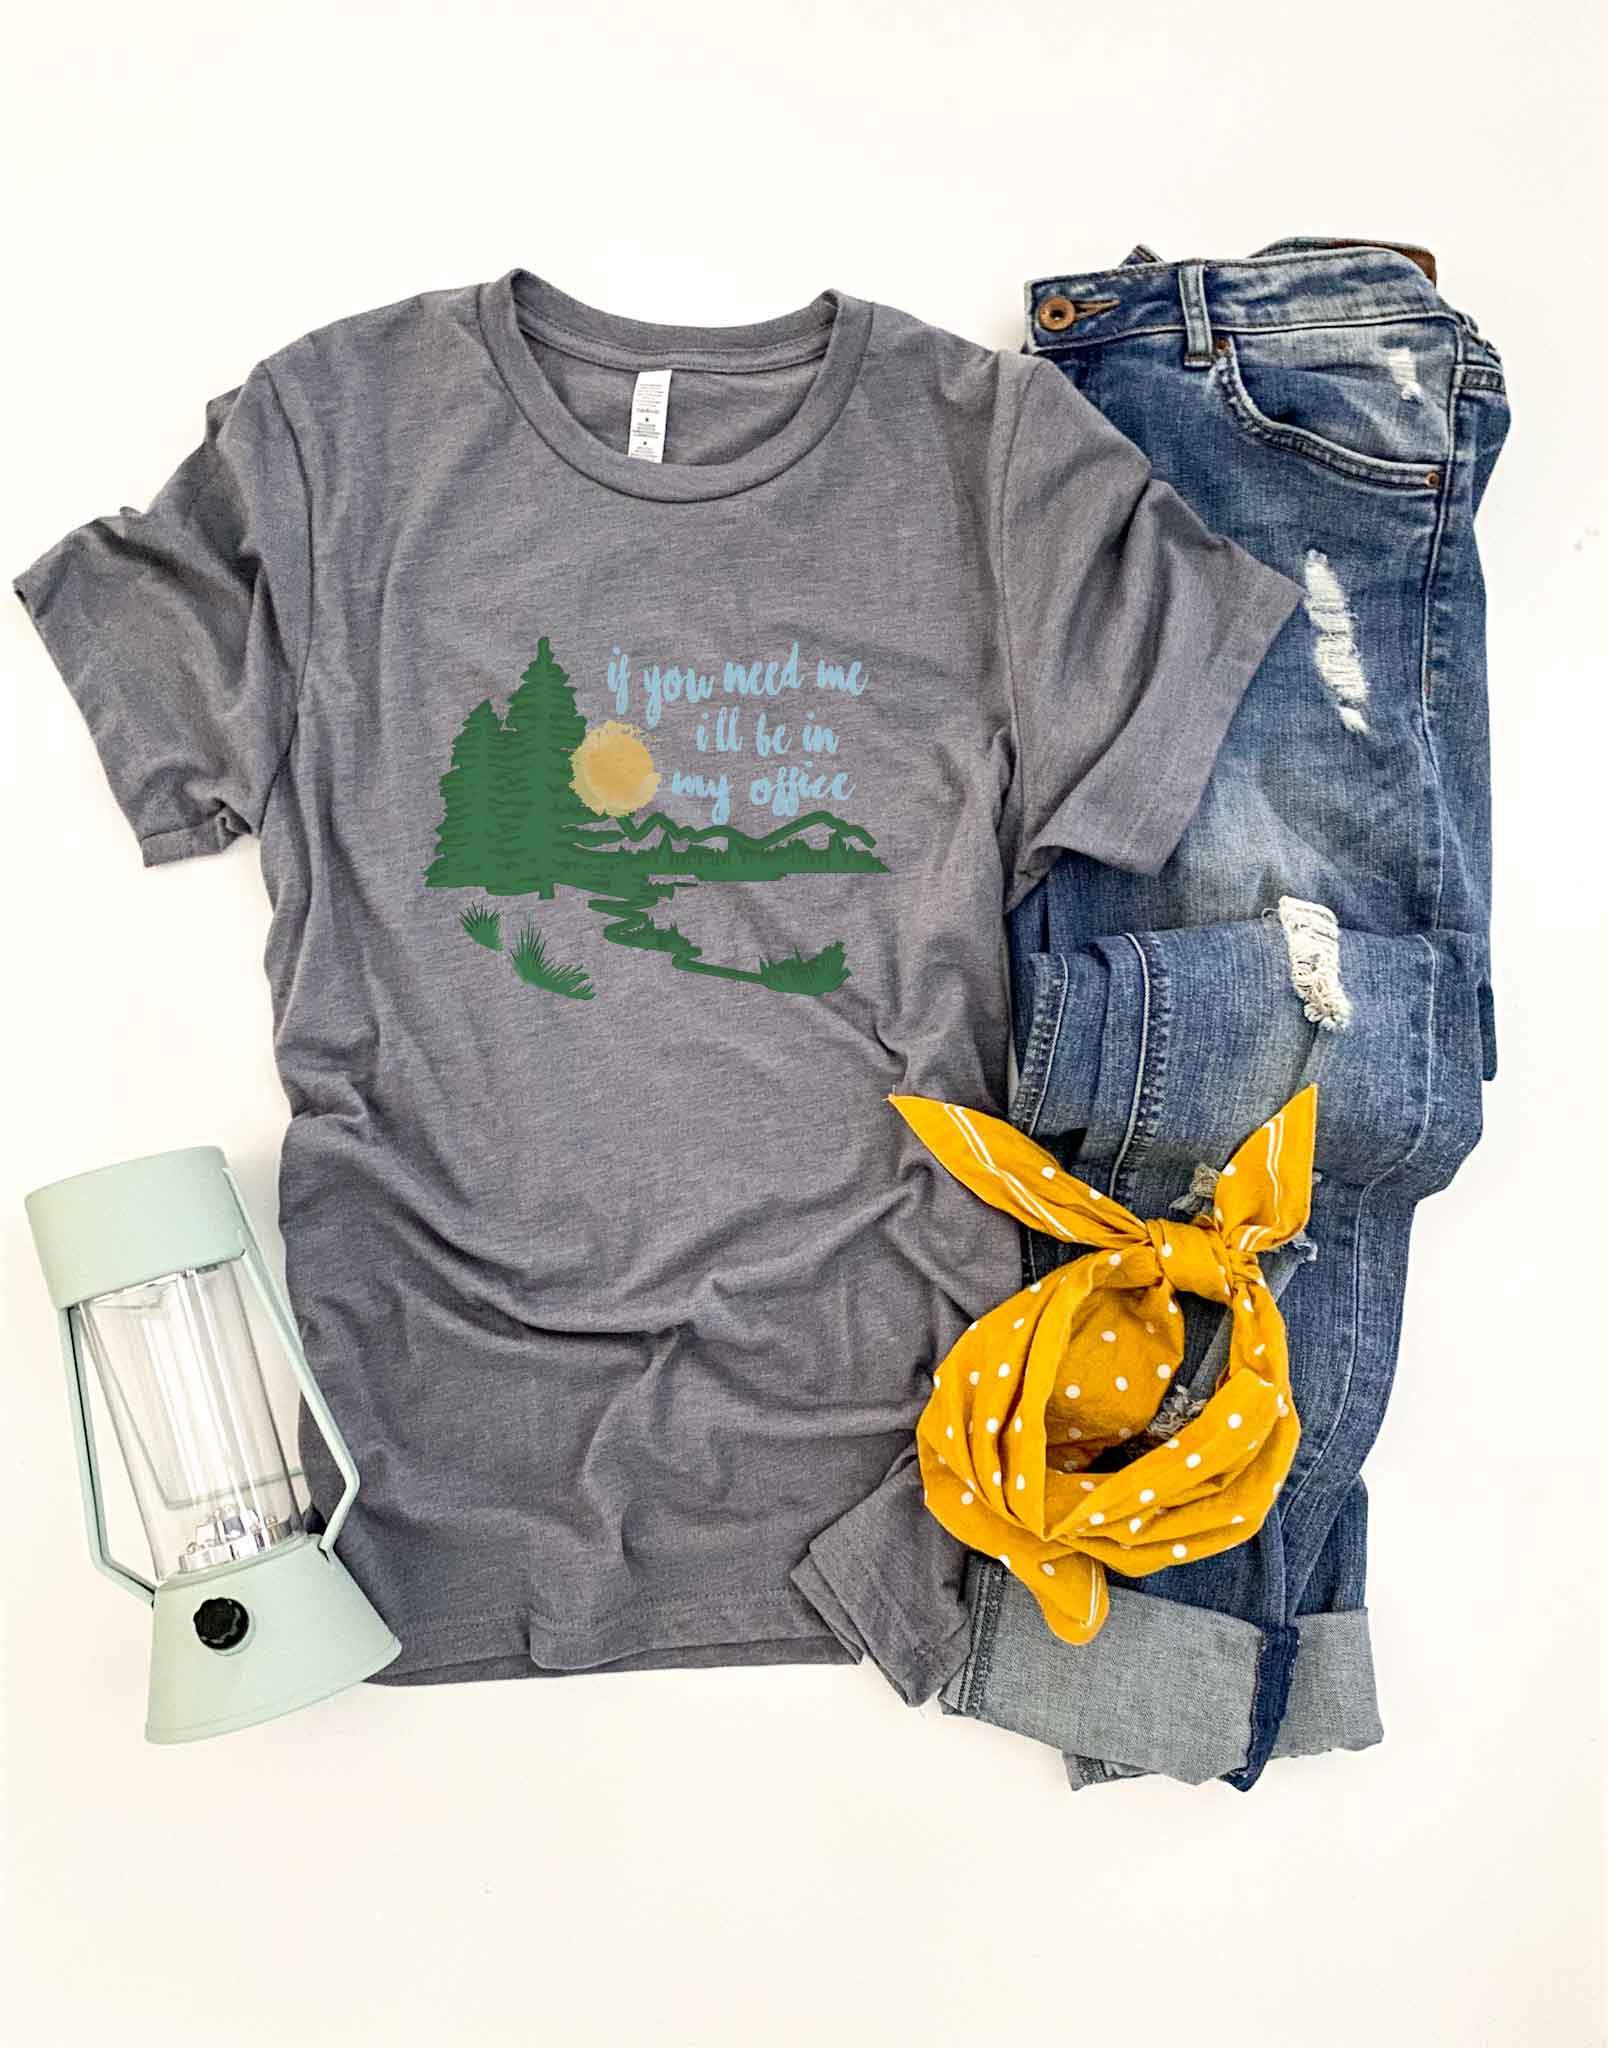 In my office mountains tee Short sleeve travel tee Bella Canvas 3001 